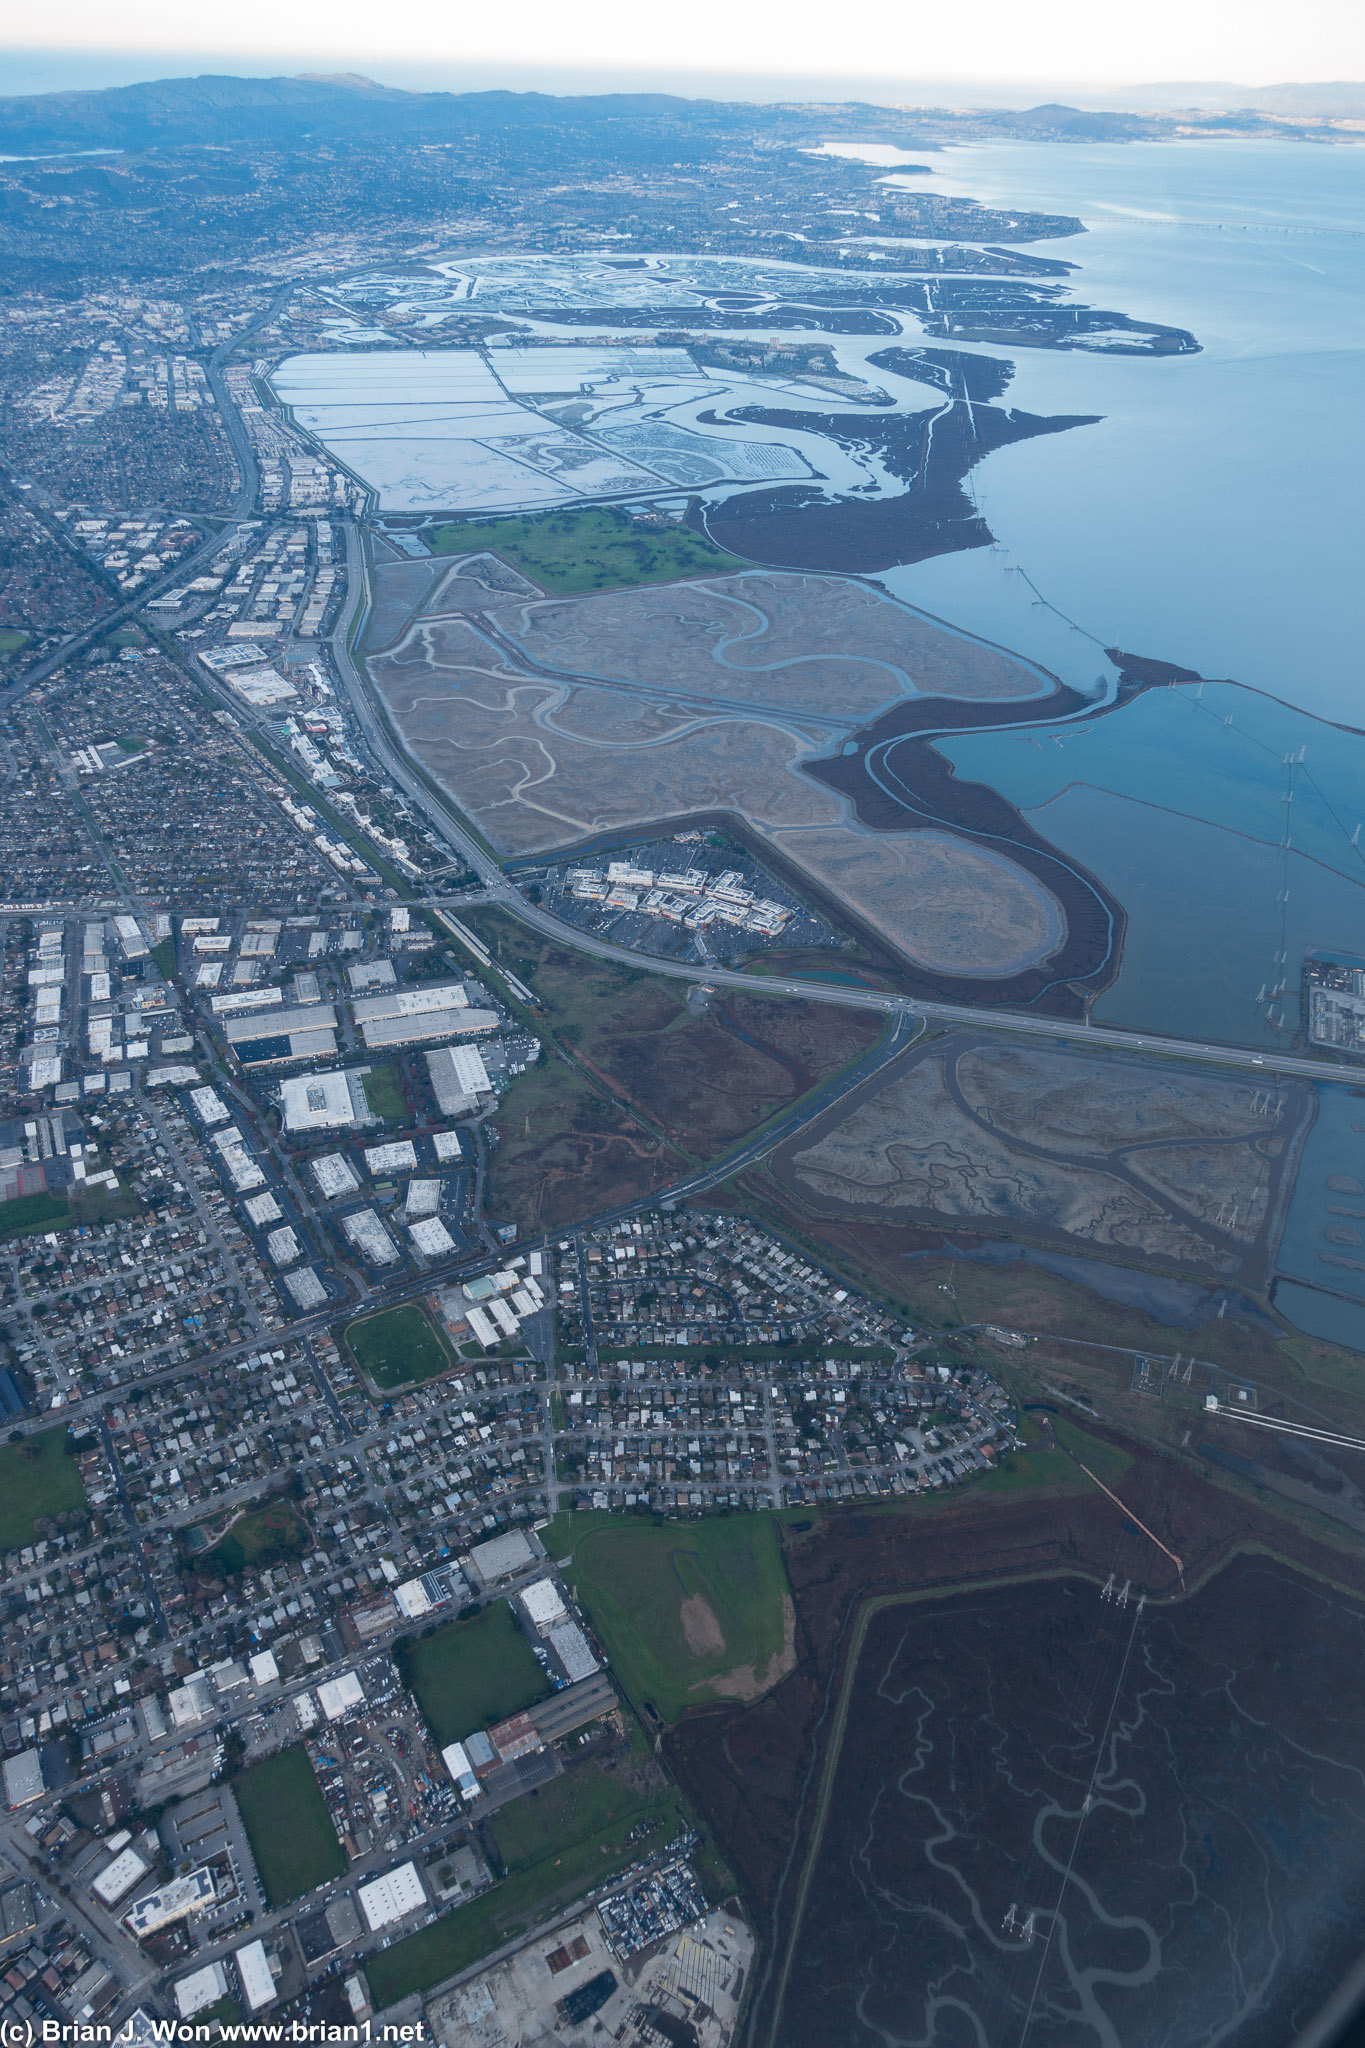 East Palo Alto in the foreground, Redwood City and Bar Island in the background.